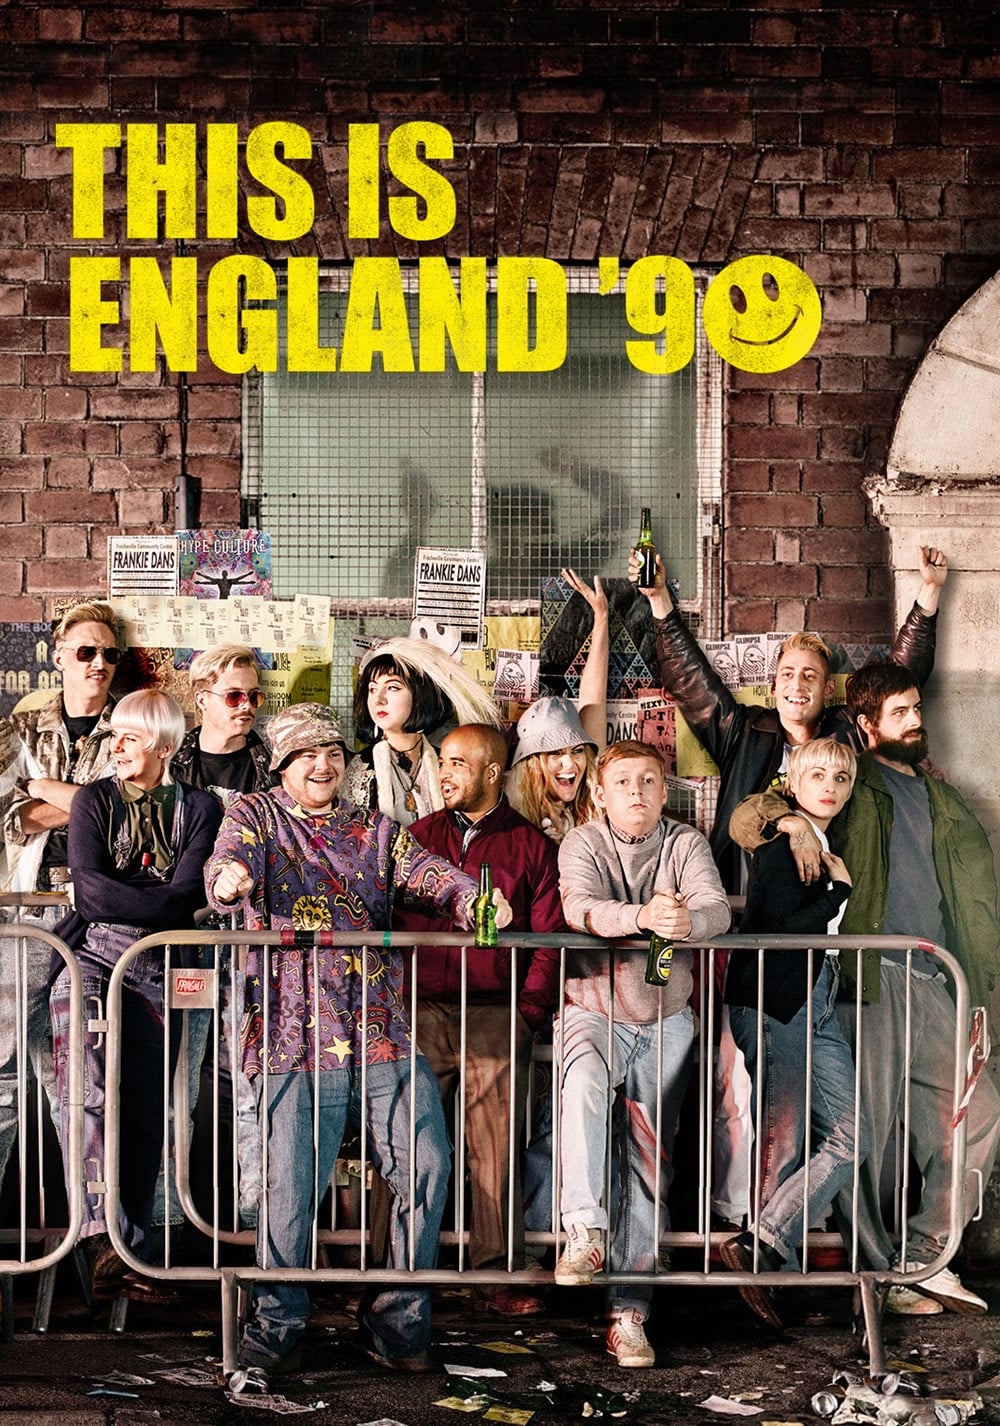 This Is England '90 TV Shows About Manchester